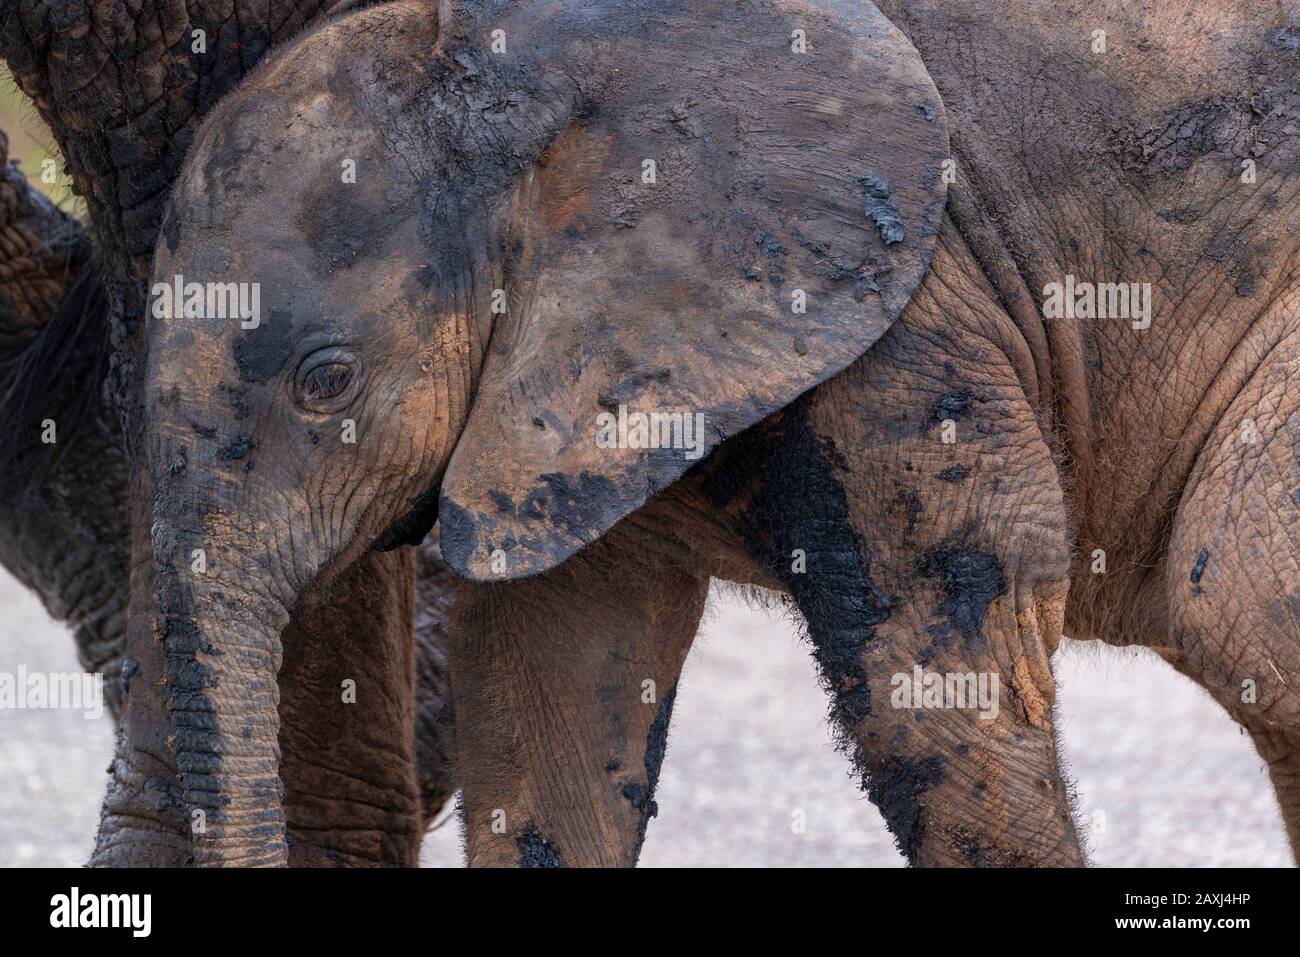 Elephant calf, after being in muddy waterhole, sheltering underneath its mother in the Addo Elephant National Park, Eastern Cape, South Africa Stock Photo